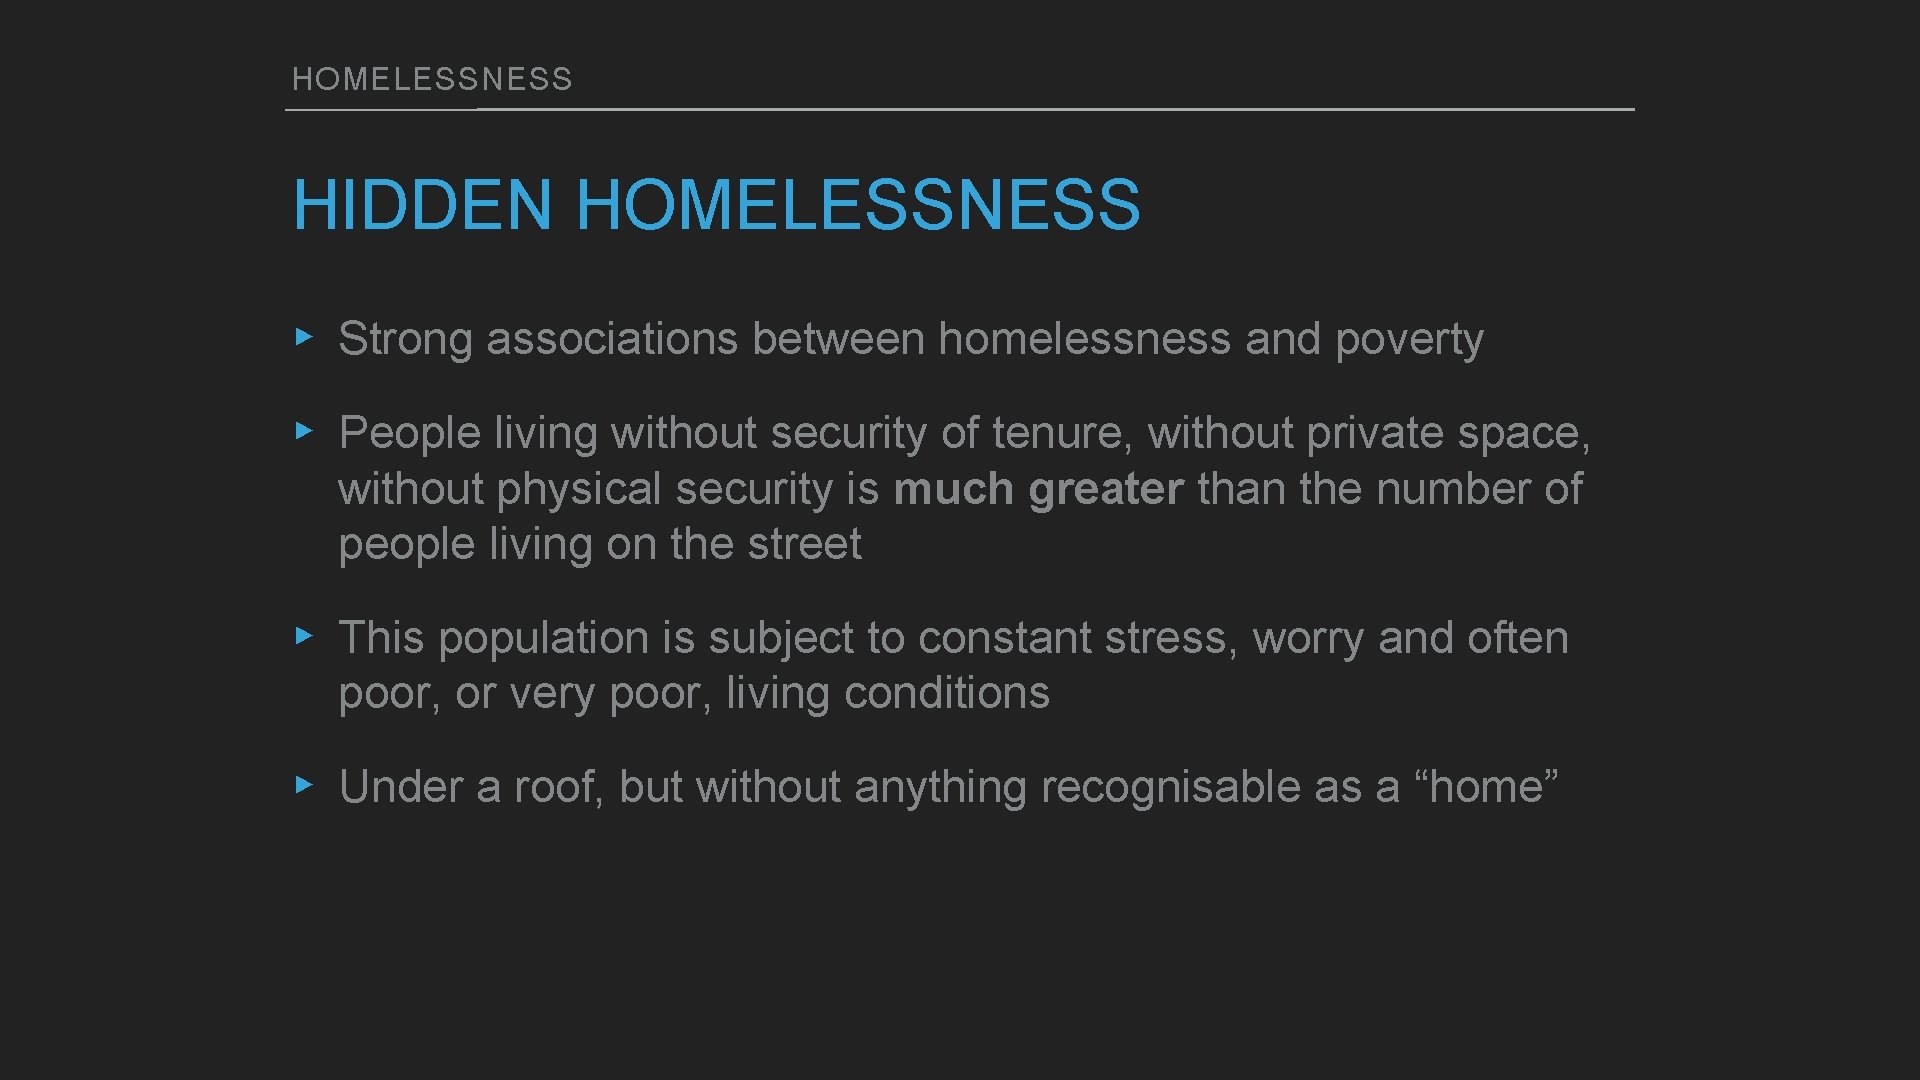 HOMELESSNESS HIDDEN HOMELESSNESS ▸ Strong associations between homelessness and poverty ▸ People living without